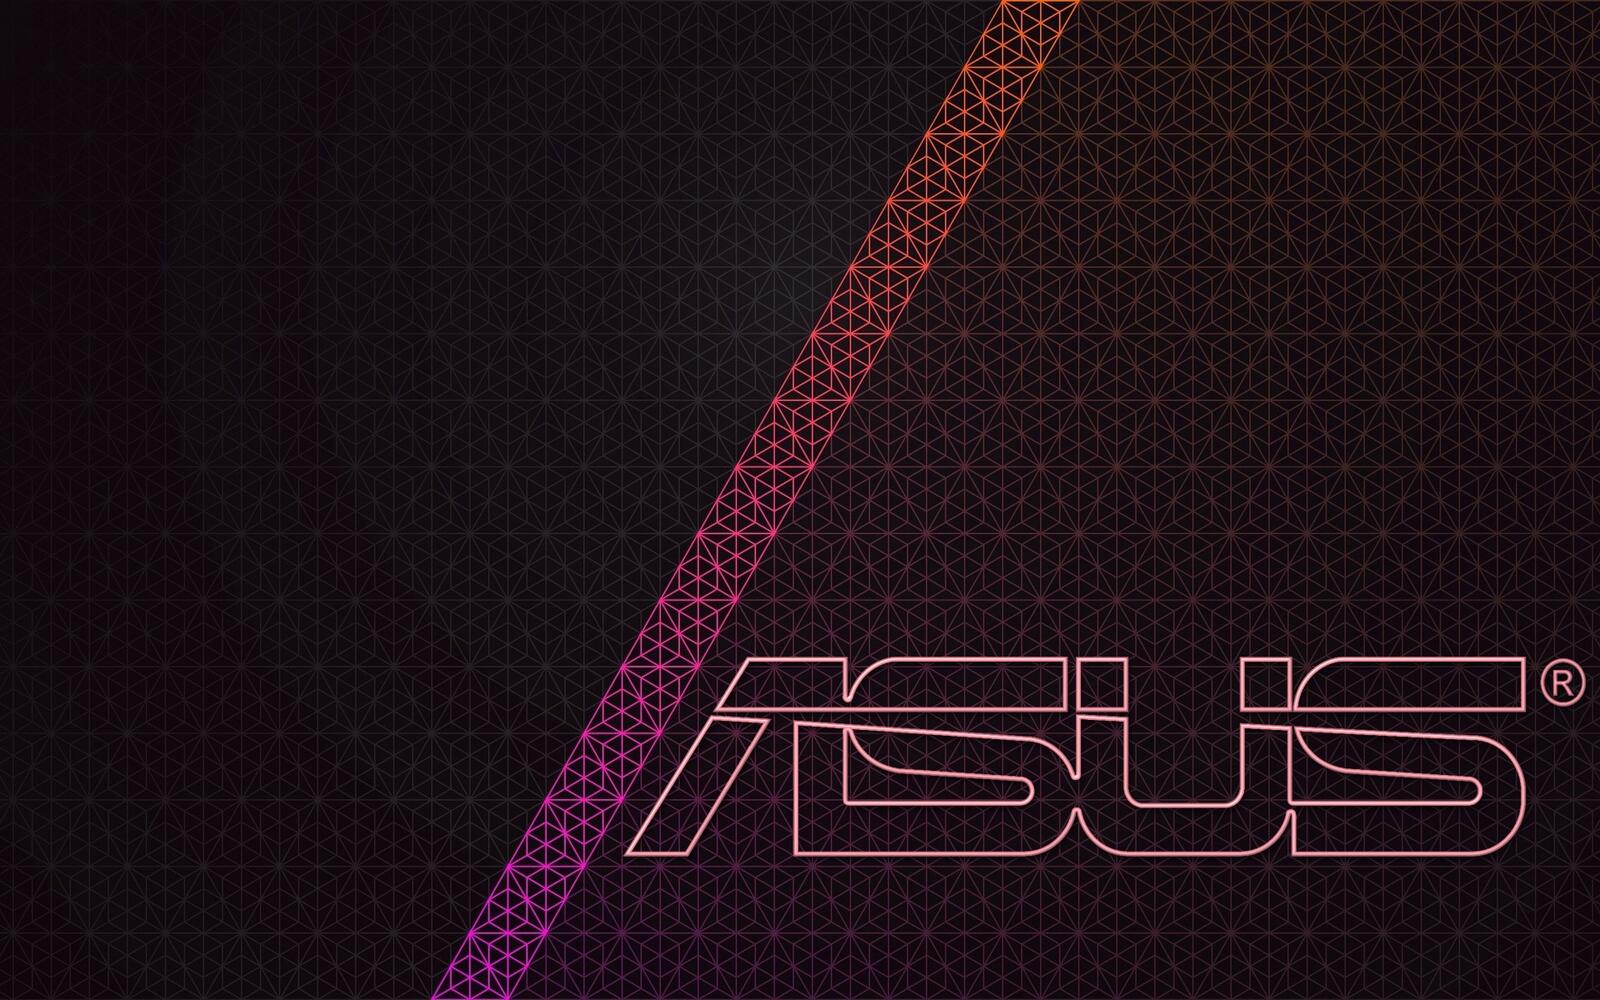 Free photo Asus logo on abstract background